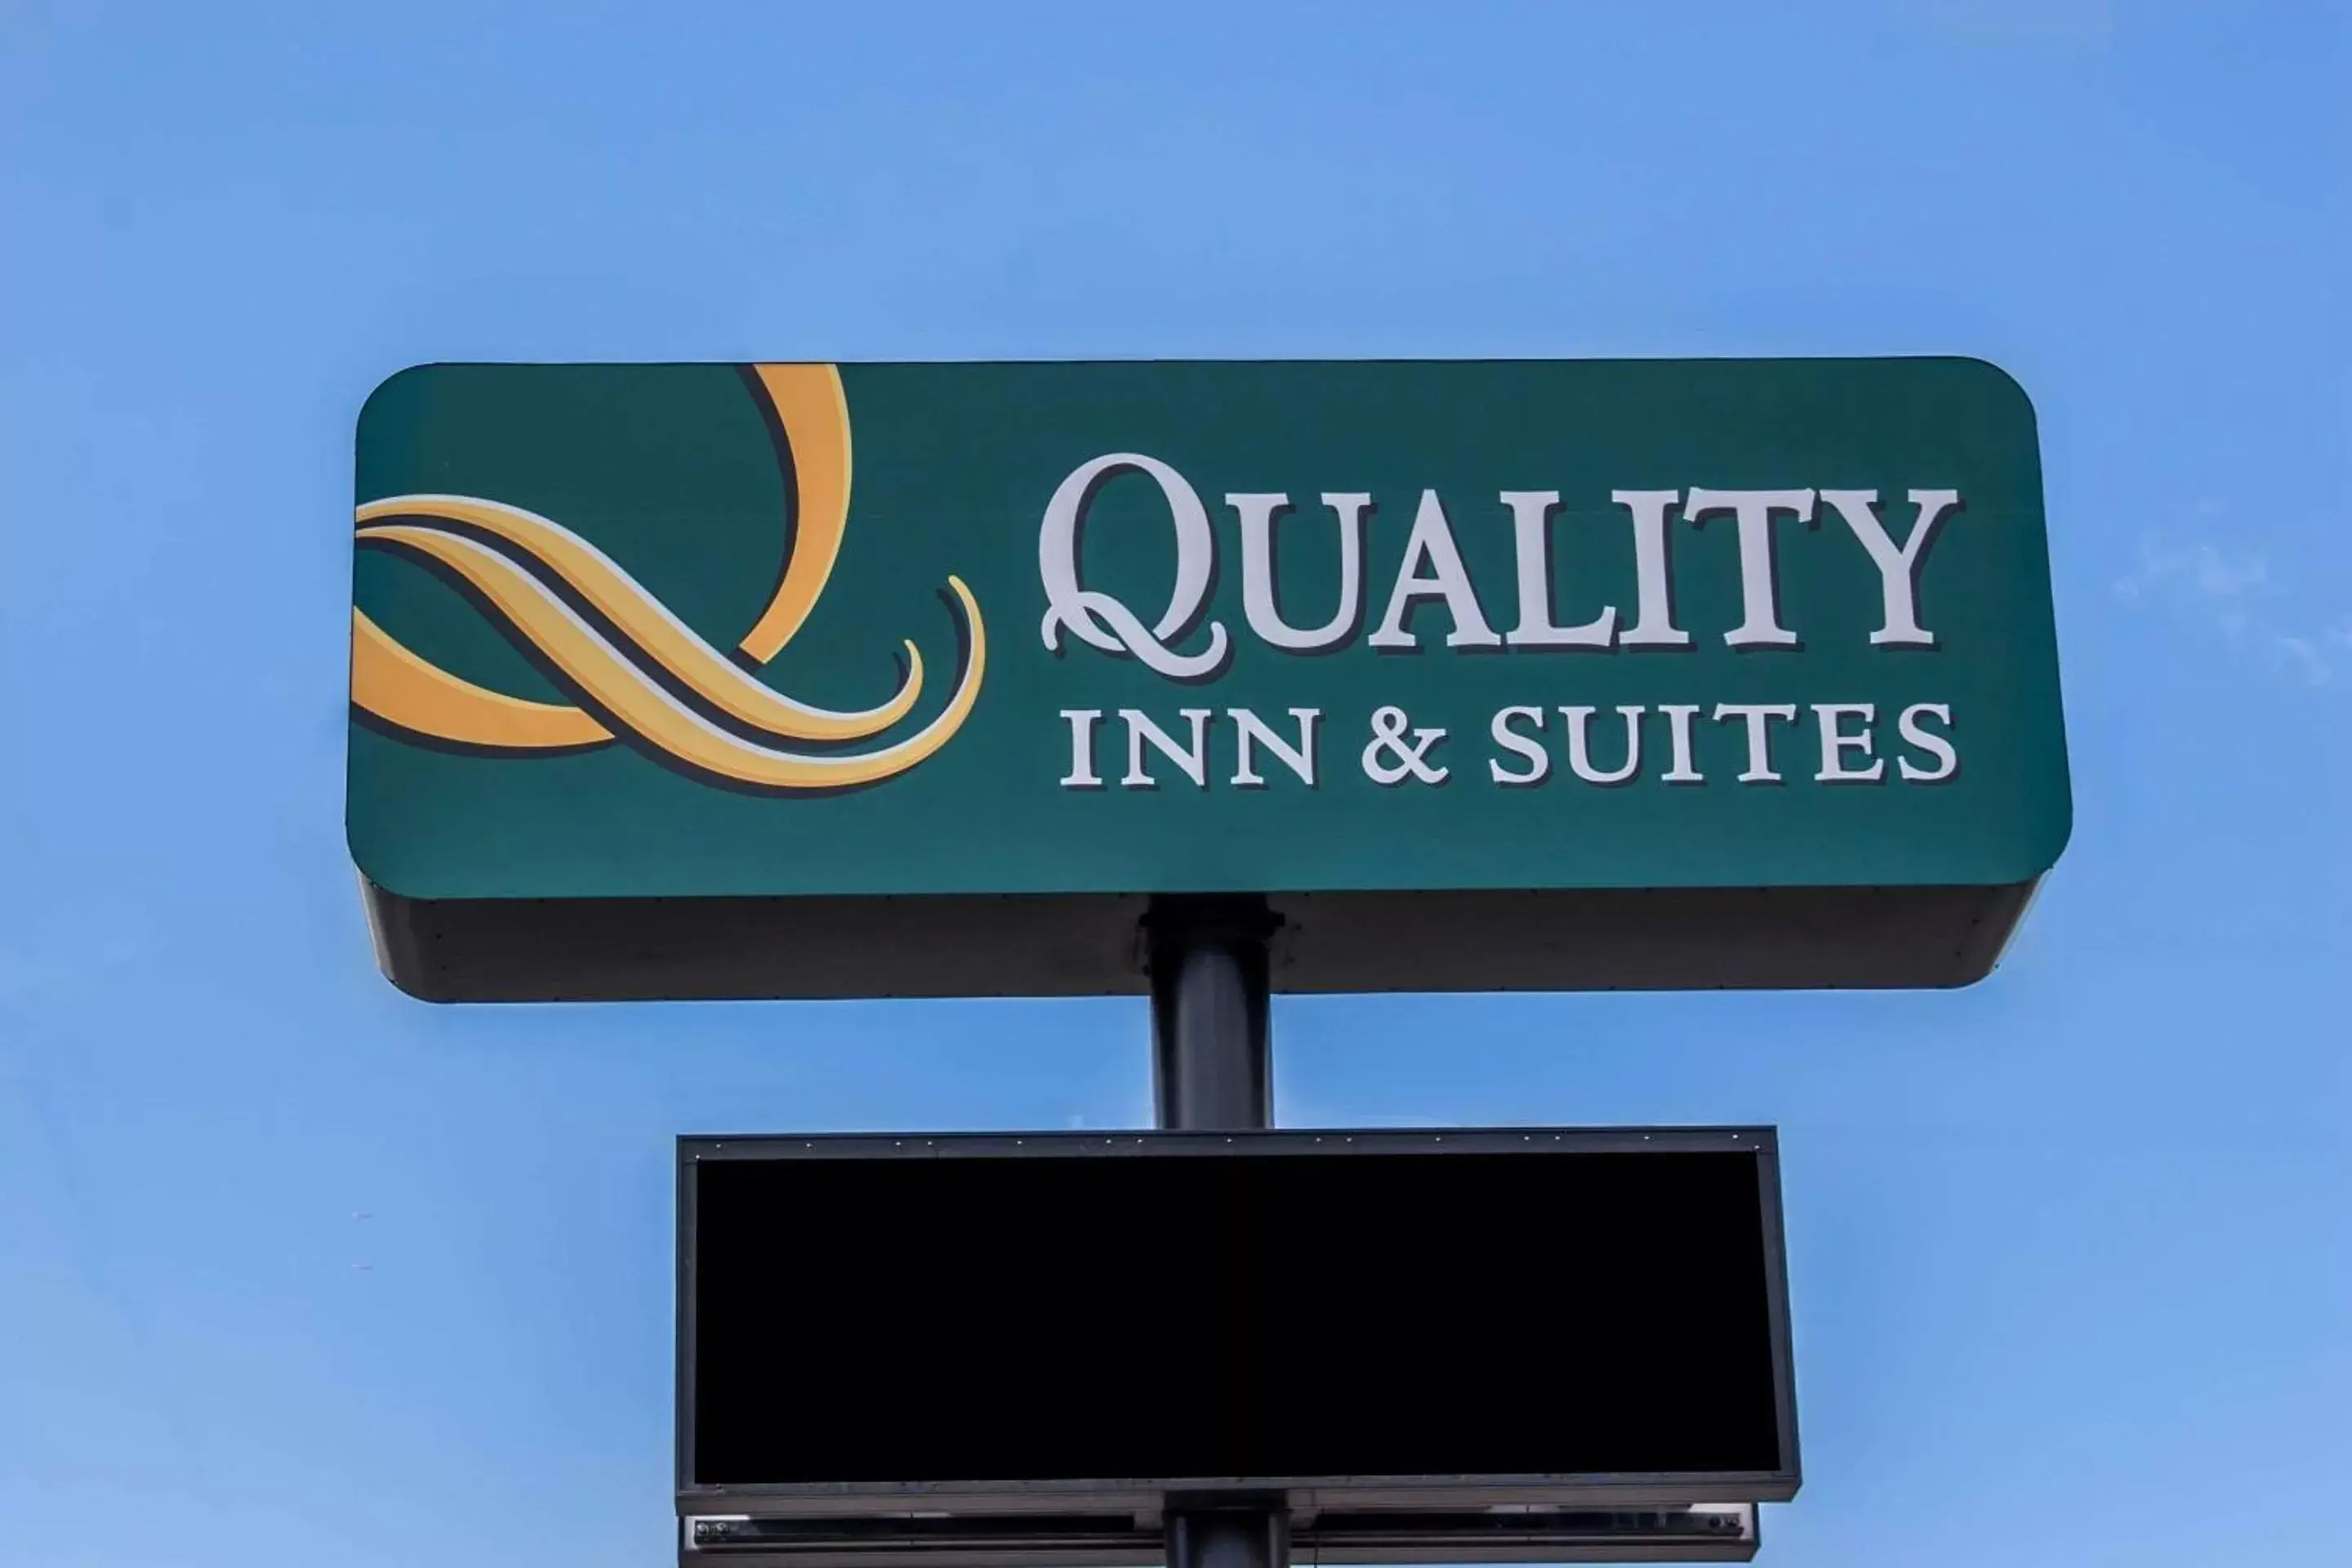 Property building in Quality Inn & Suites Fife Seattle